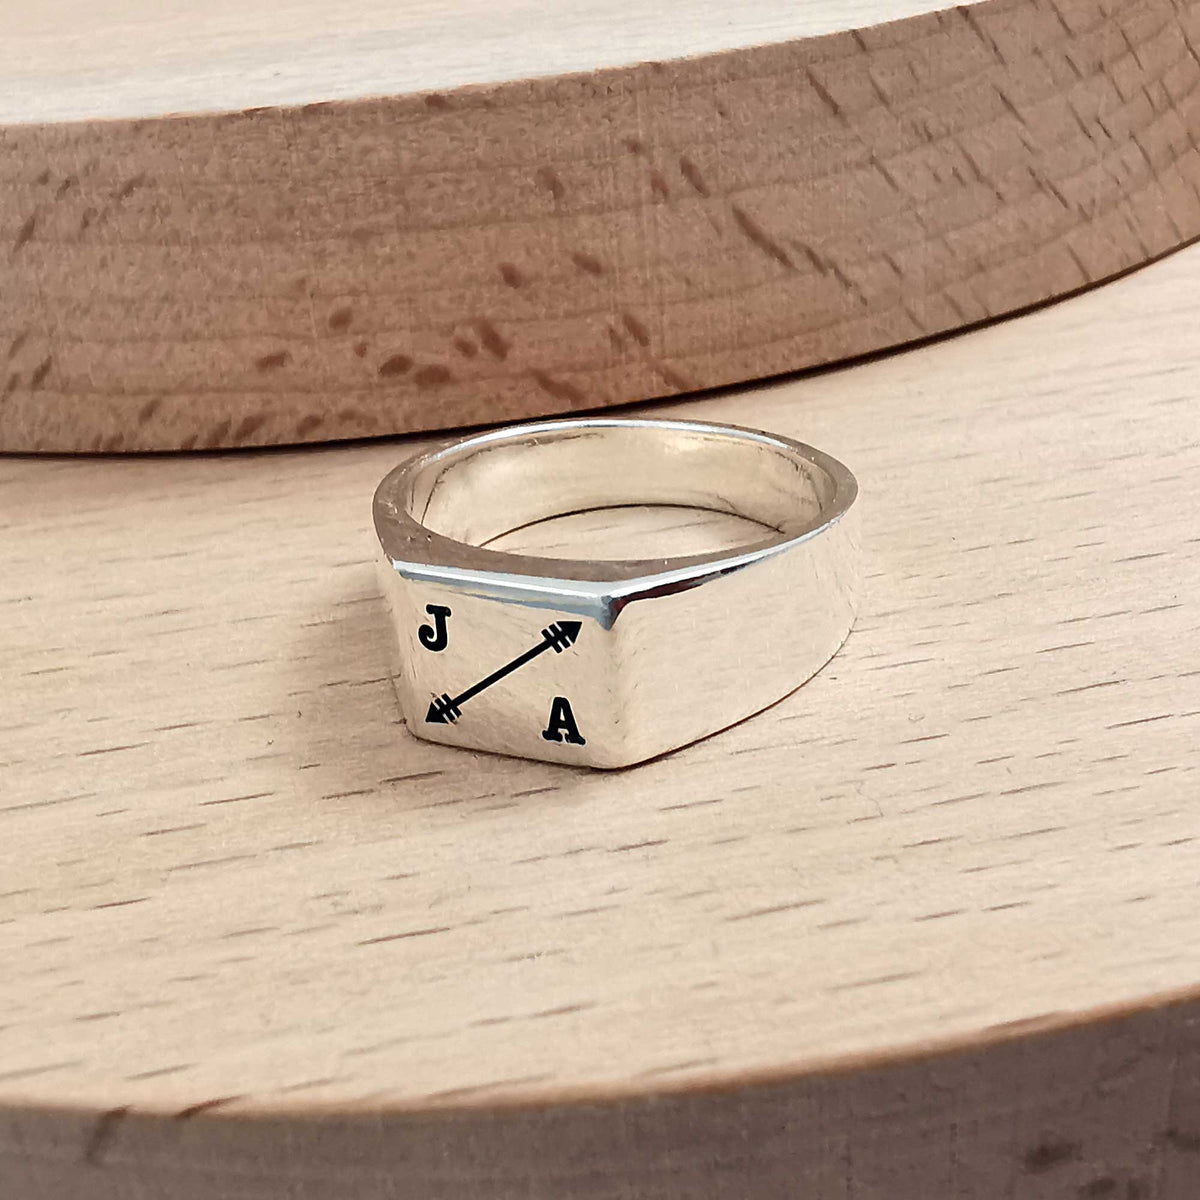 custom engraved bespoke signet ring with initials and arrow symbol